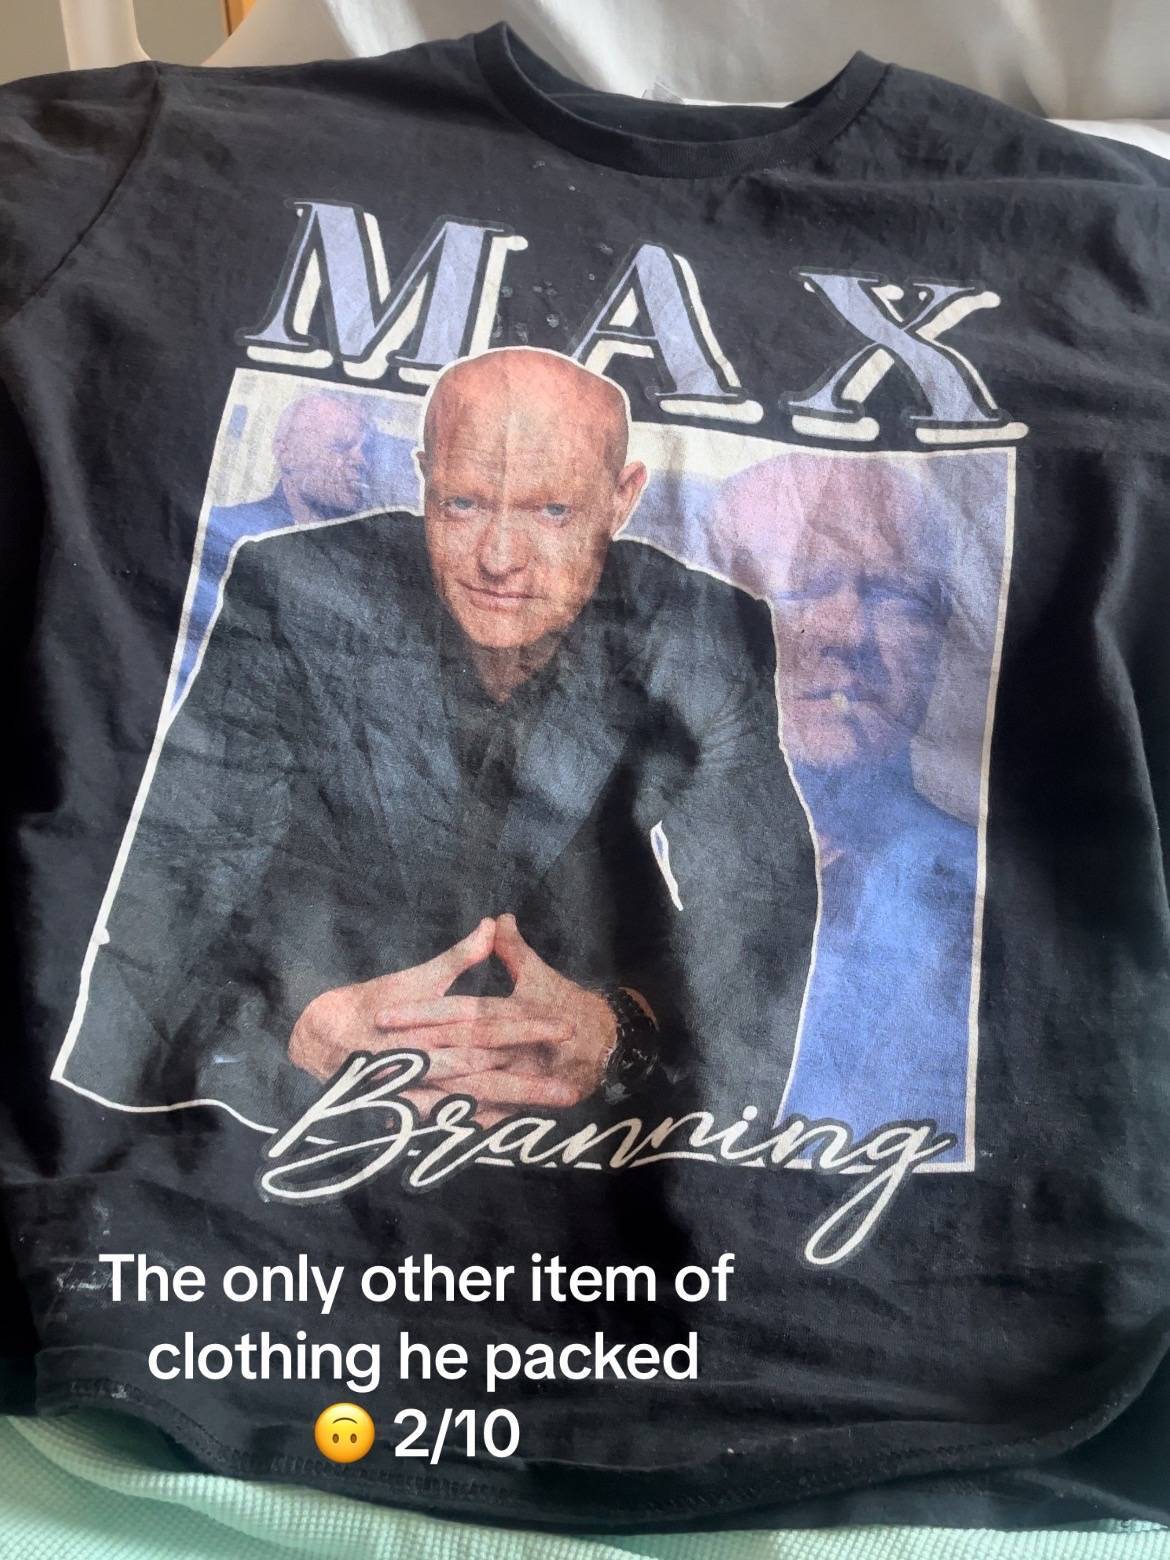 The Max Branning T-shirt was clearly vital for her daughter's birth